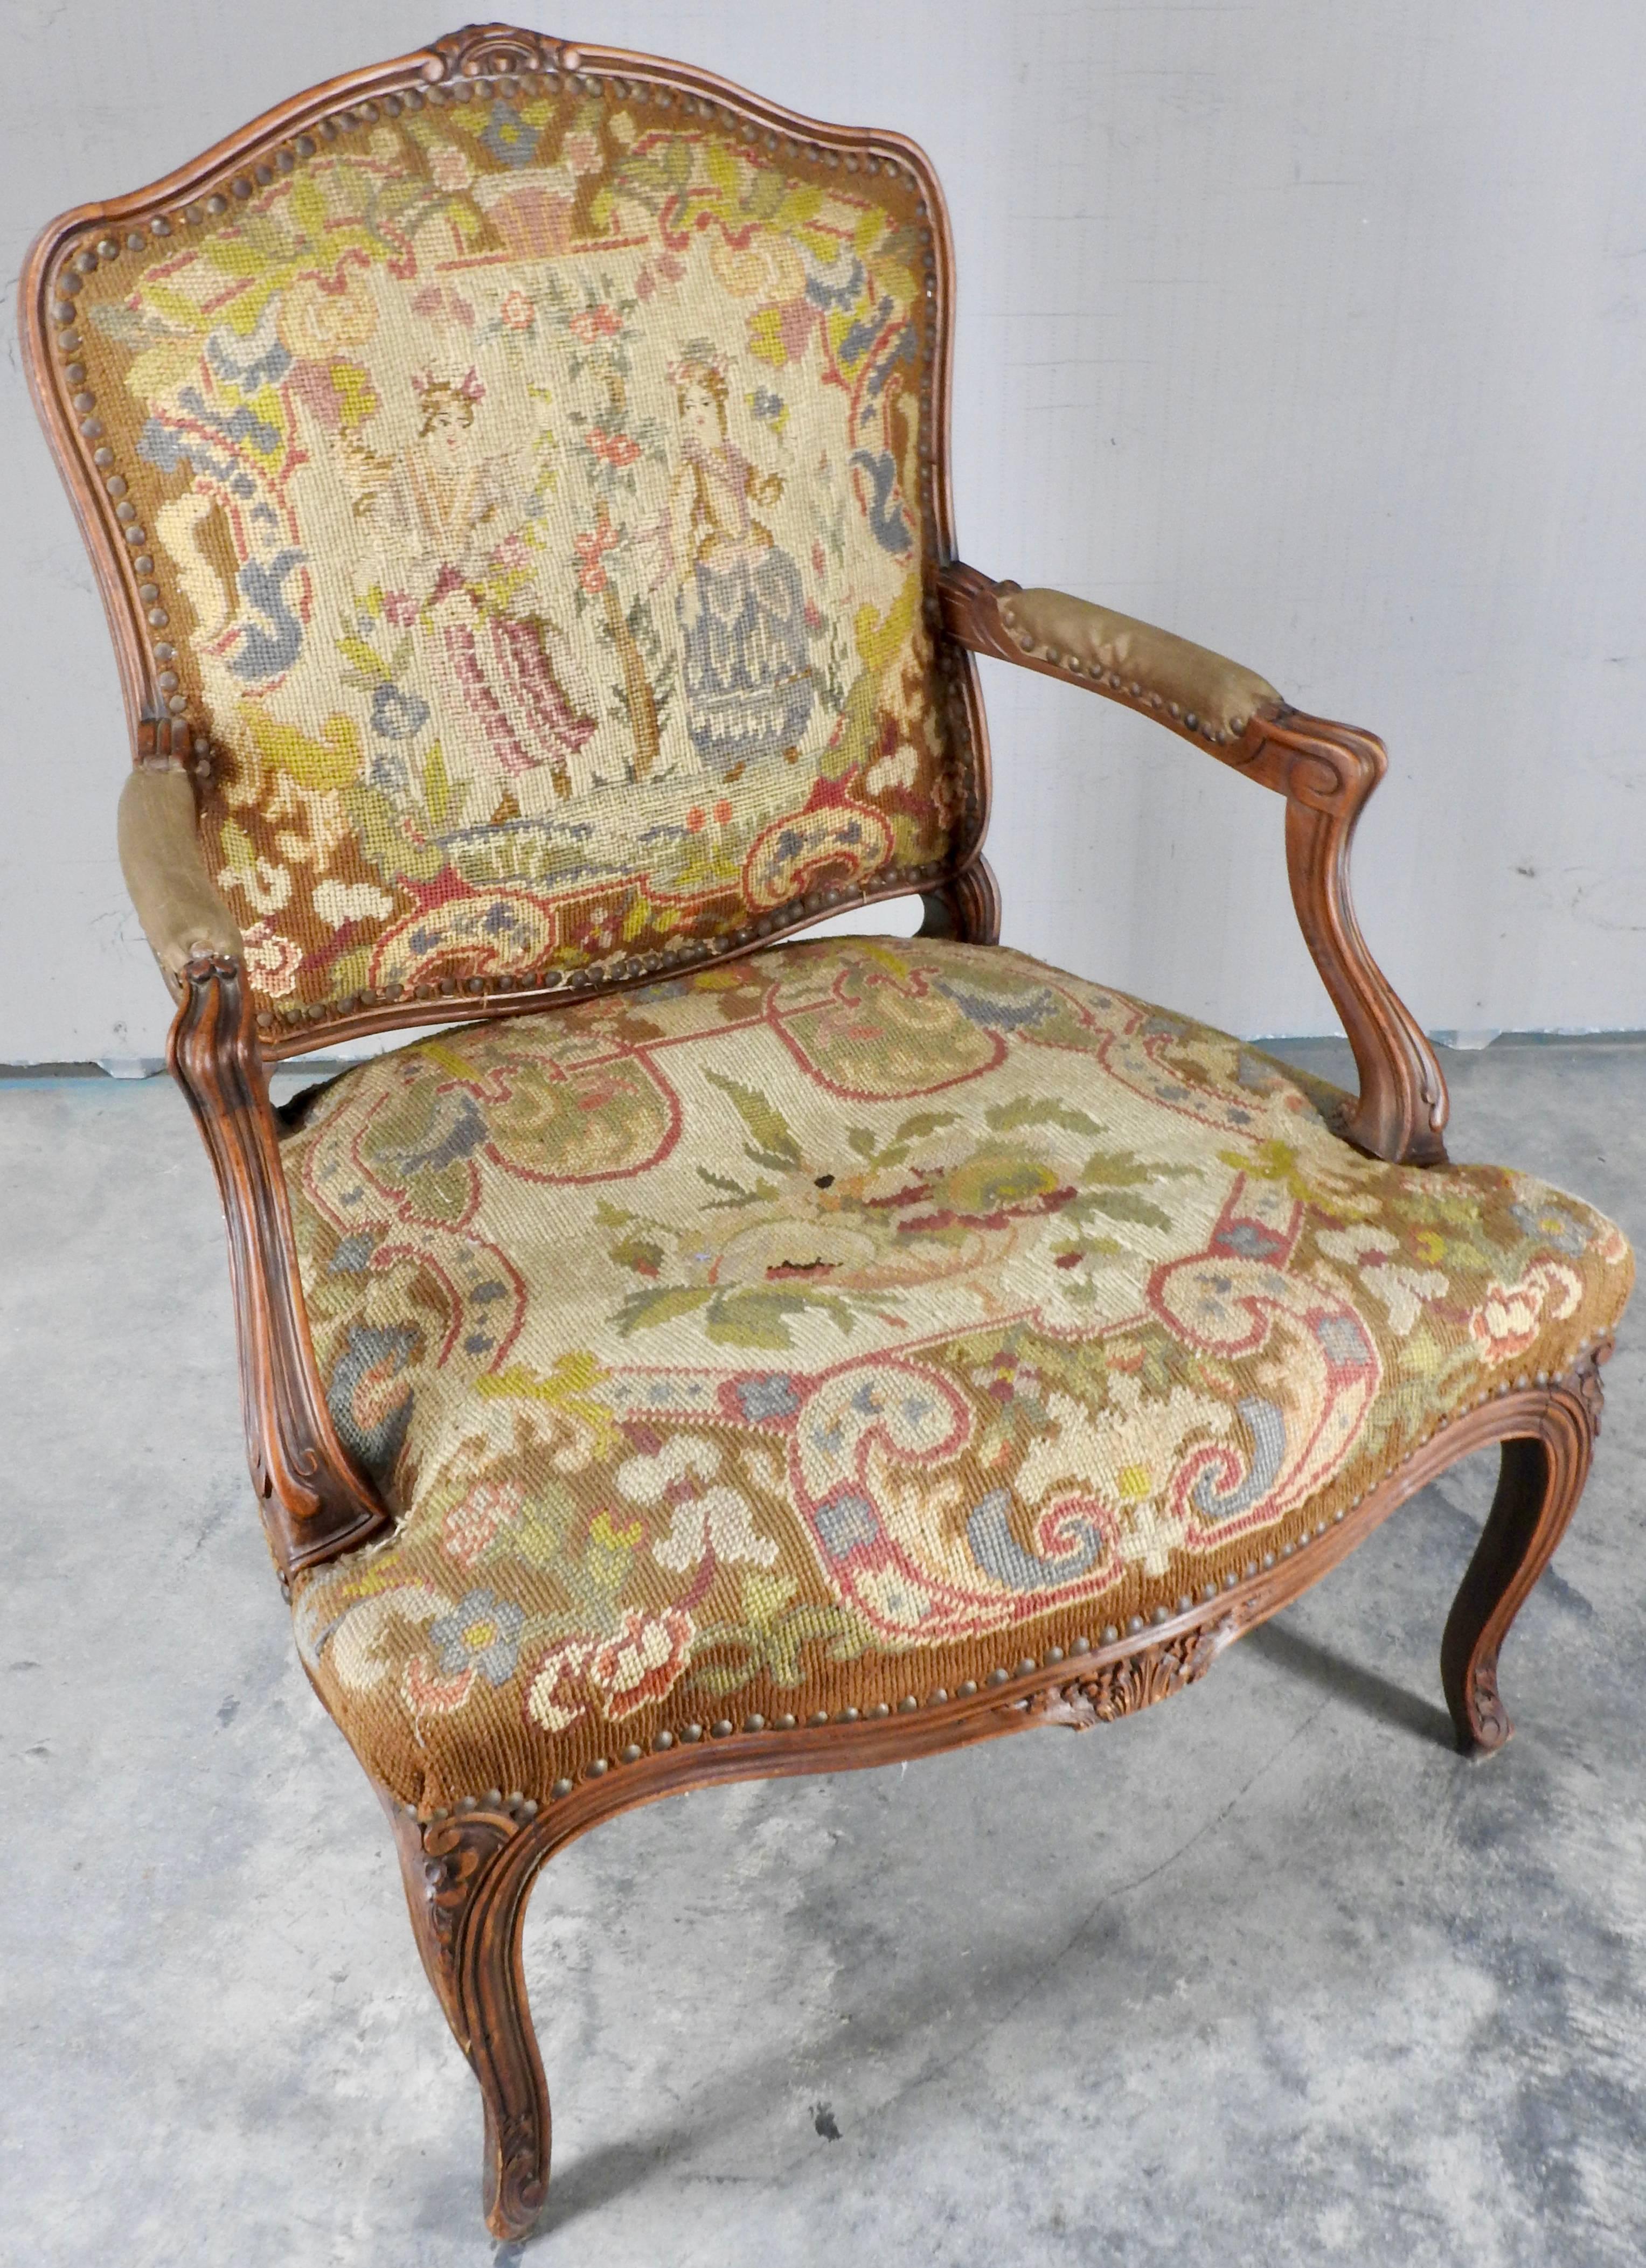 This beautiful Rococo chair has all the intricate hand-carving details. On either of the front legs there is a floral motif surrounded by scrollwork. In the center of the seat is another group of florals and scrollwork hand carved detail. Rising to